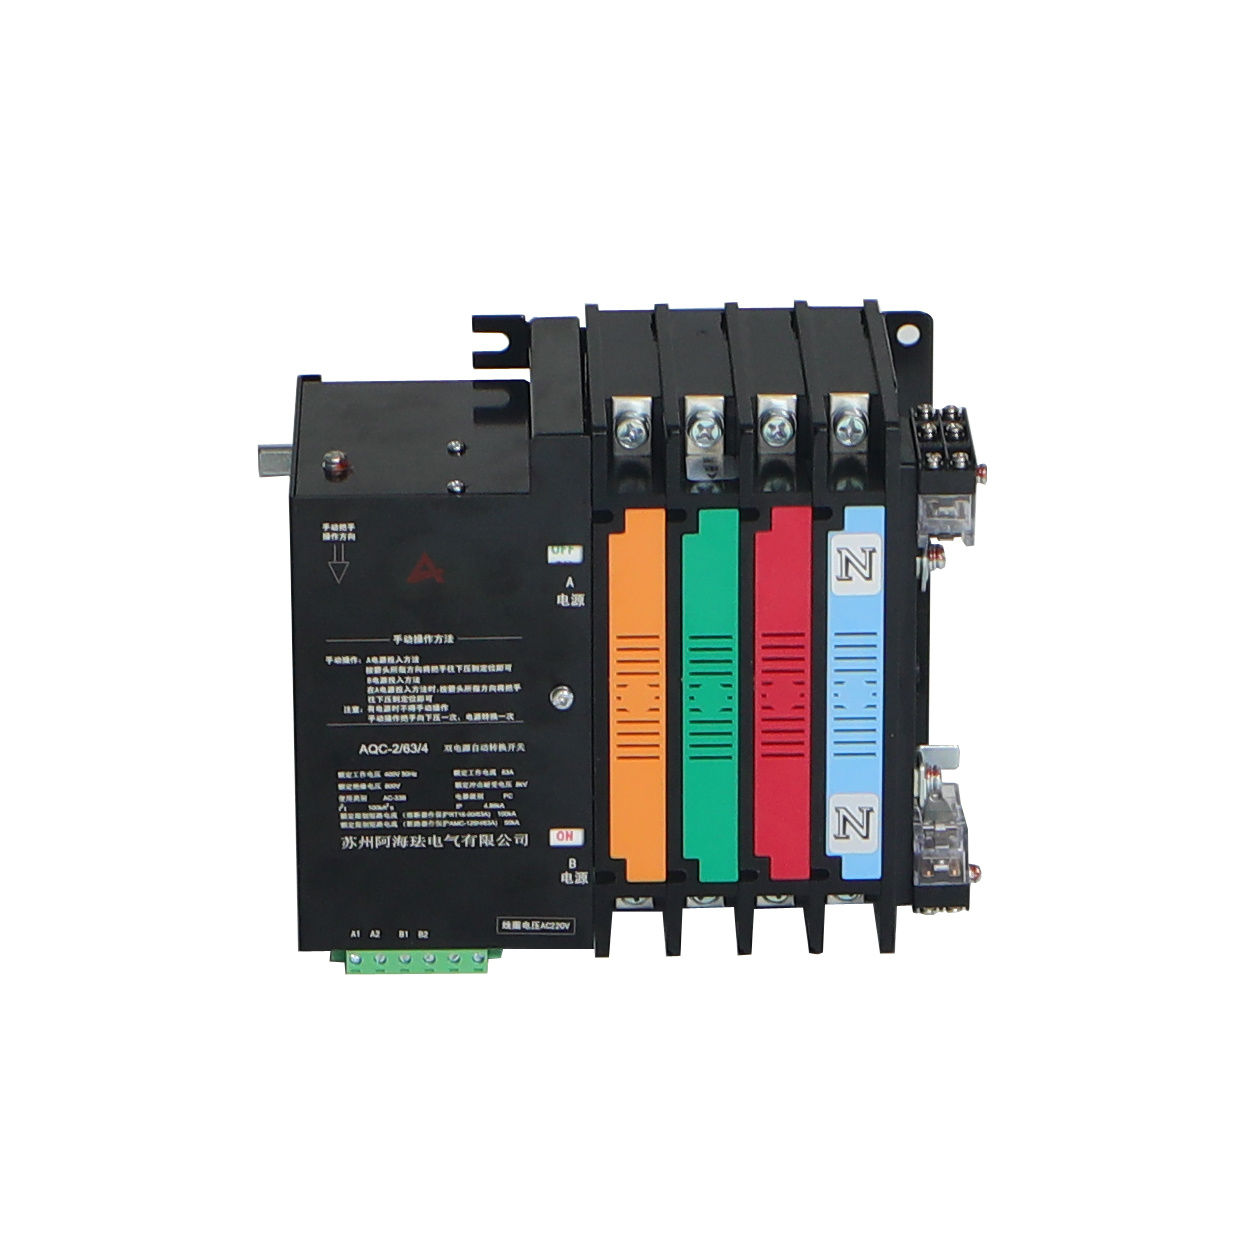 AQC series automatic transfer switch two section type